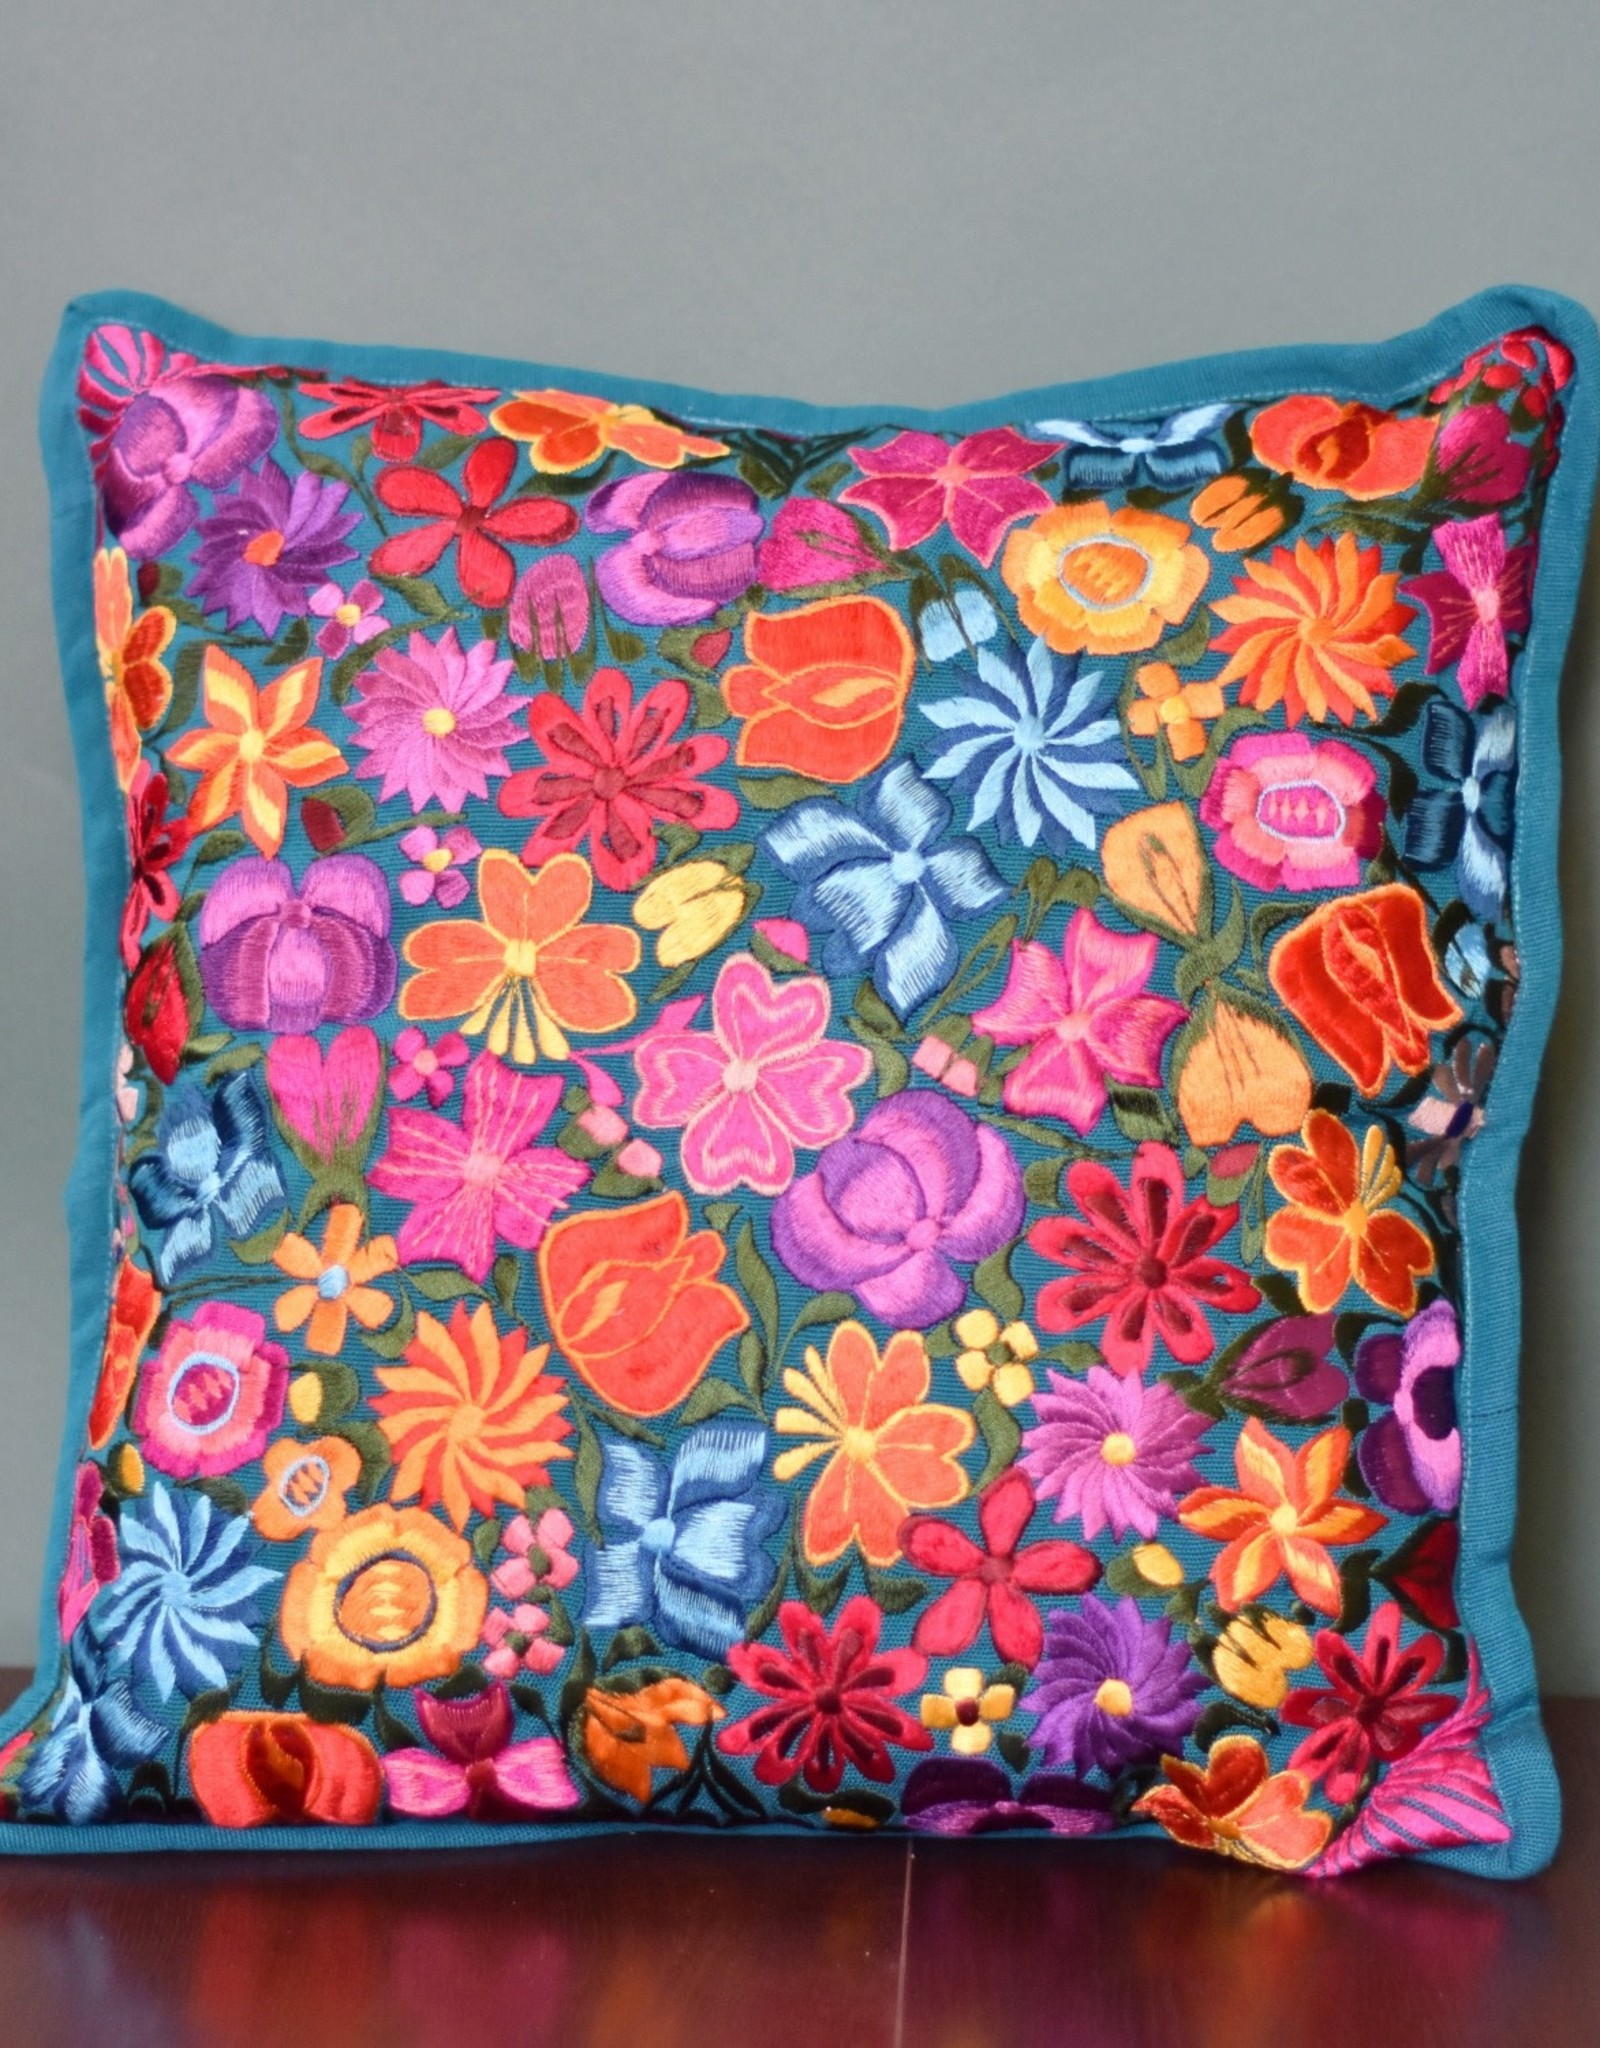 Lucia's Imports Fiesta Floral Pillowcase